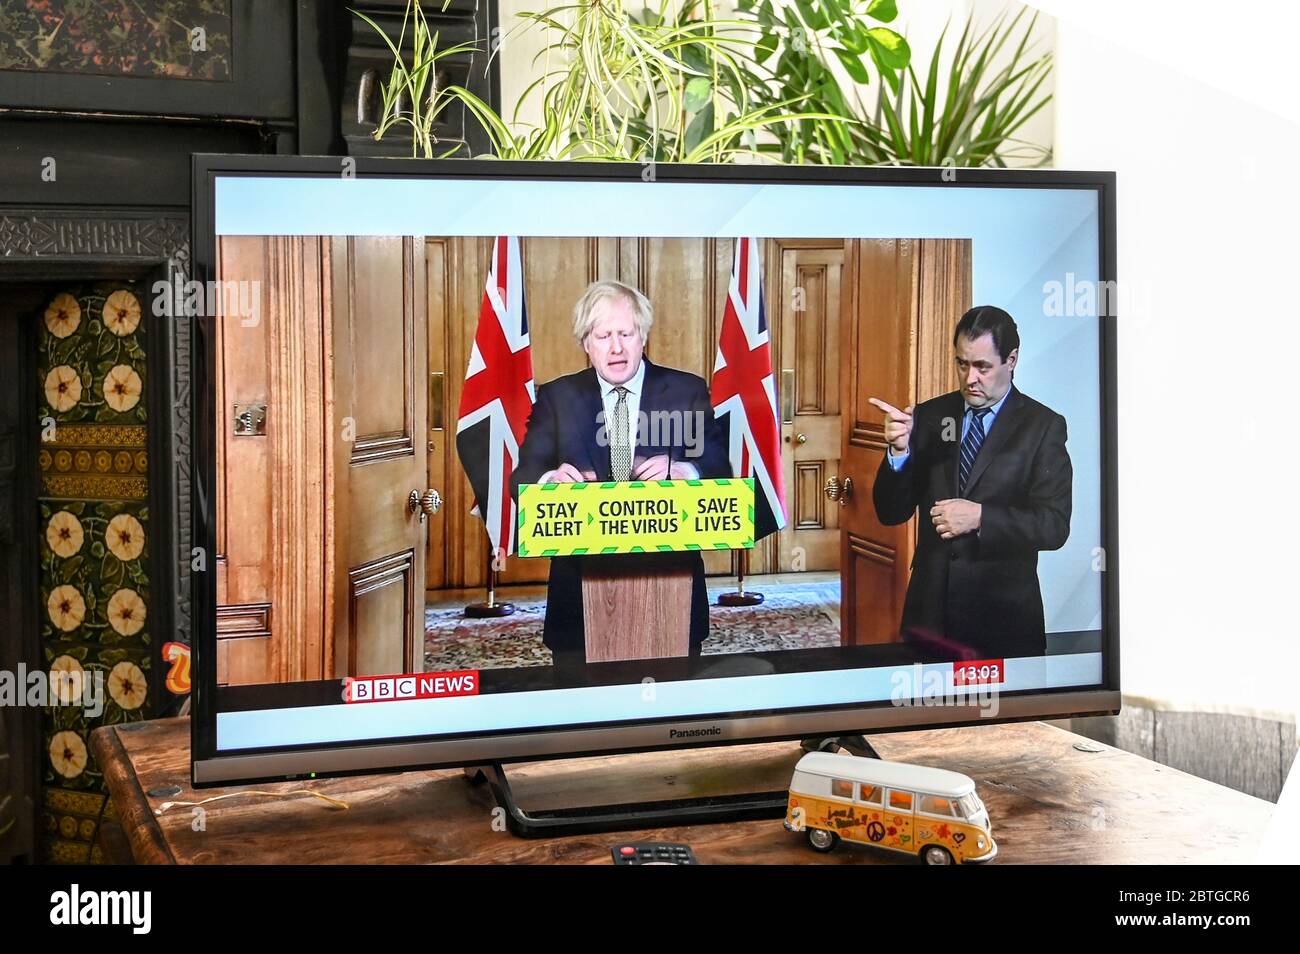 Prime Minister Boris Johnson giving a televised press conference from Downing Street in regard to Covid-19 with 'stay alert, save lives' slogan. Stock Photo